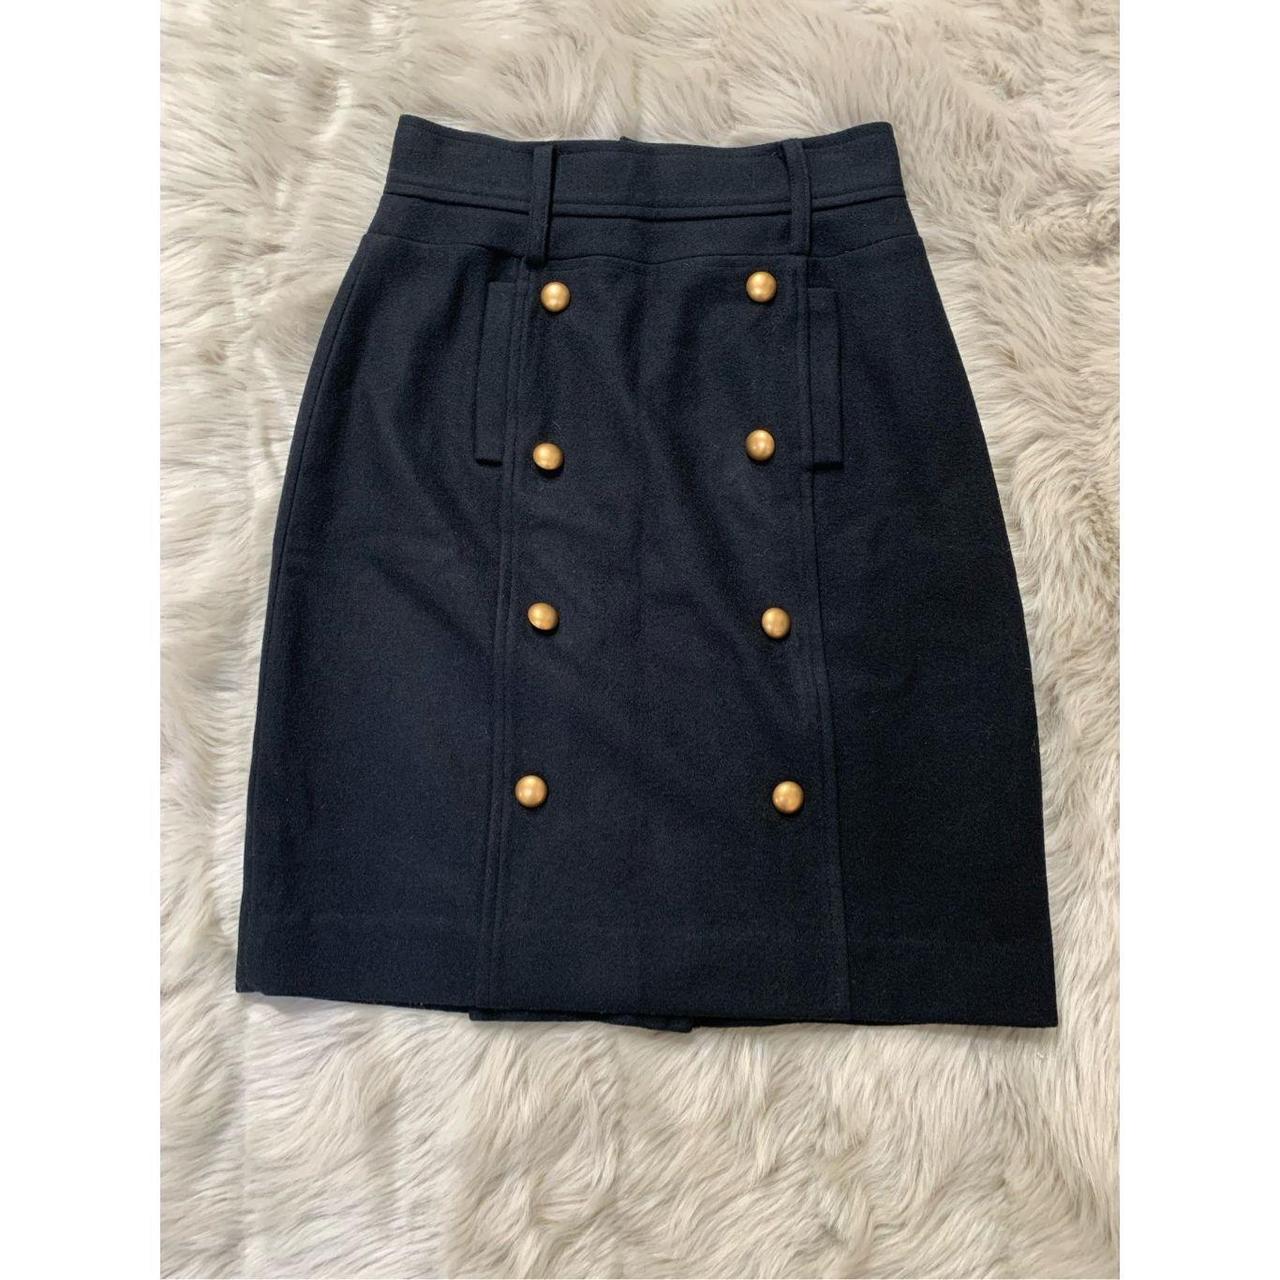 Camilla and Marc Women's Black and Gold Skirt